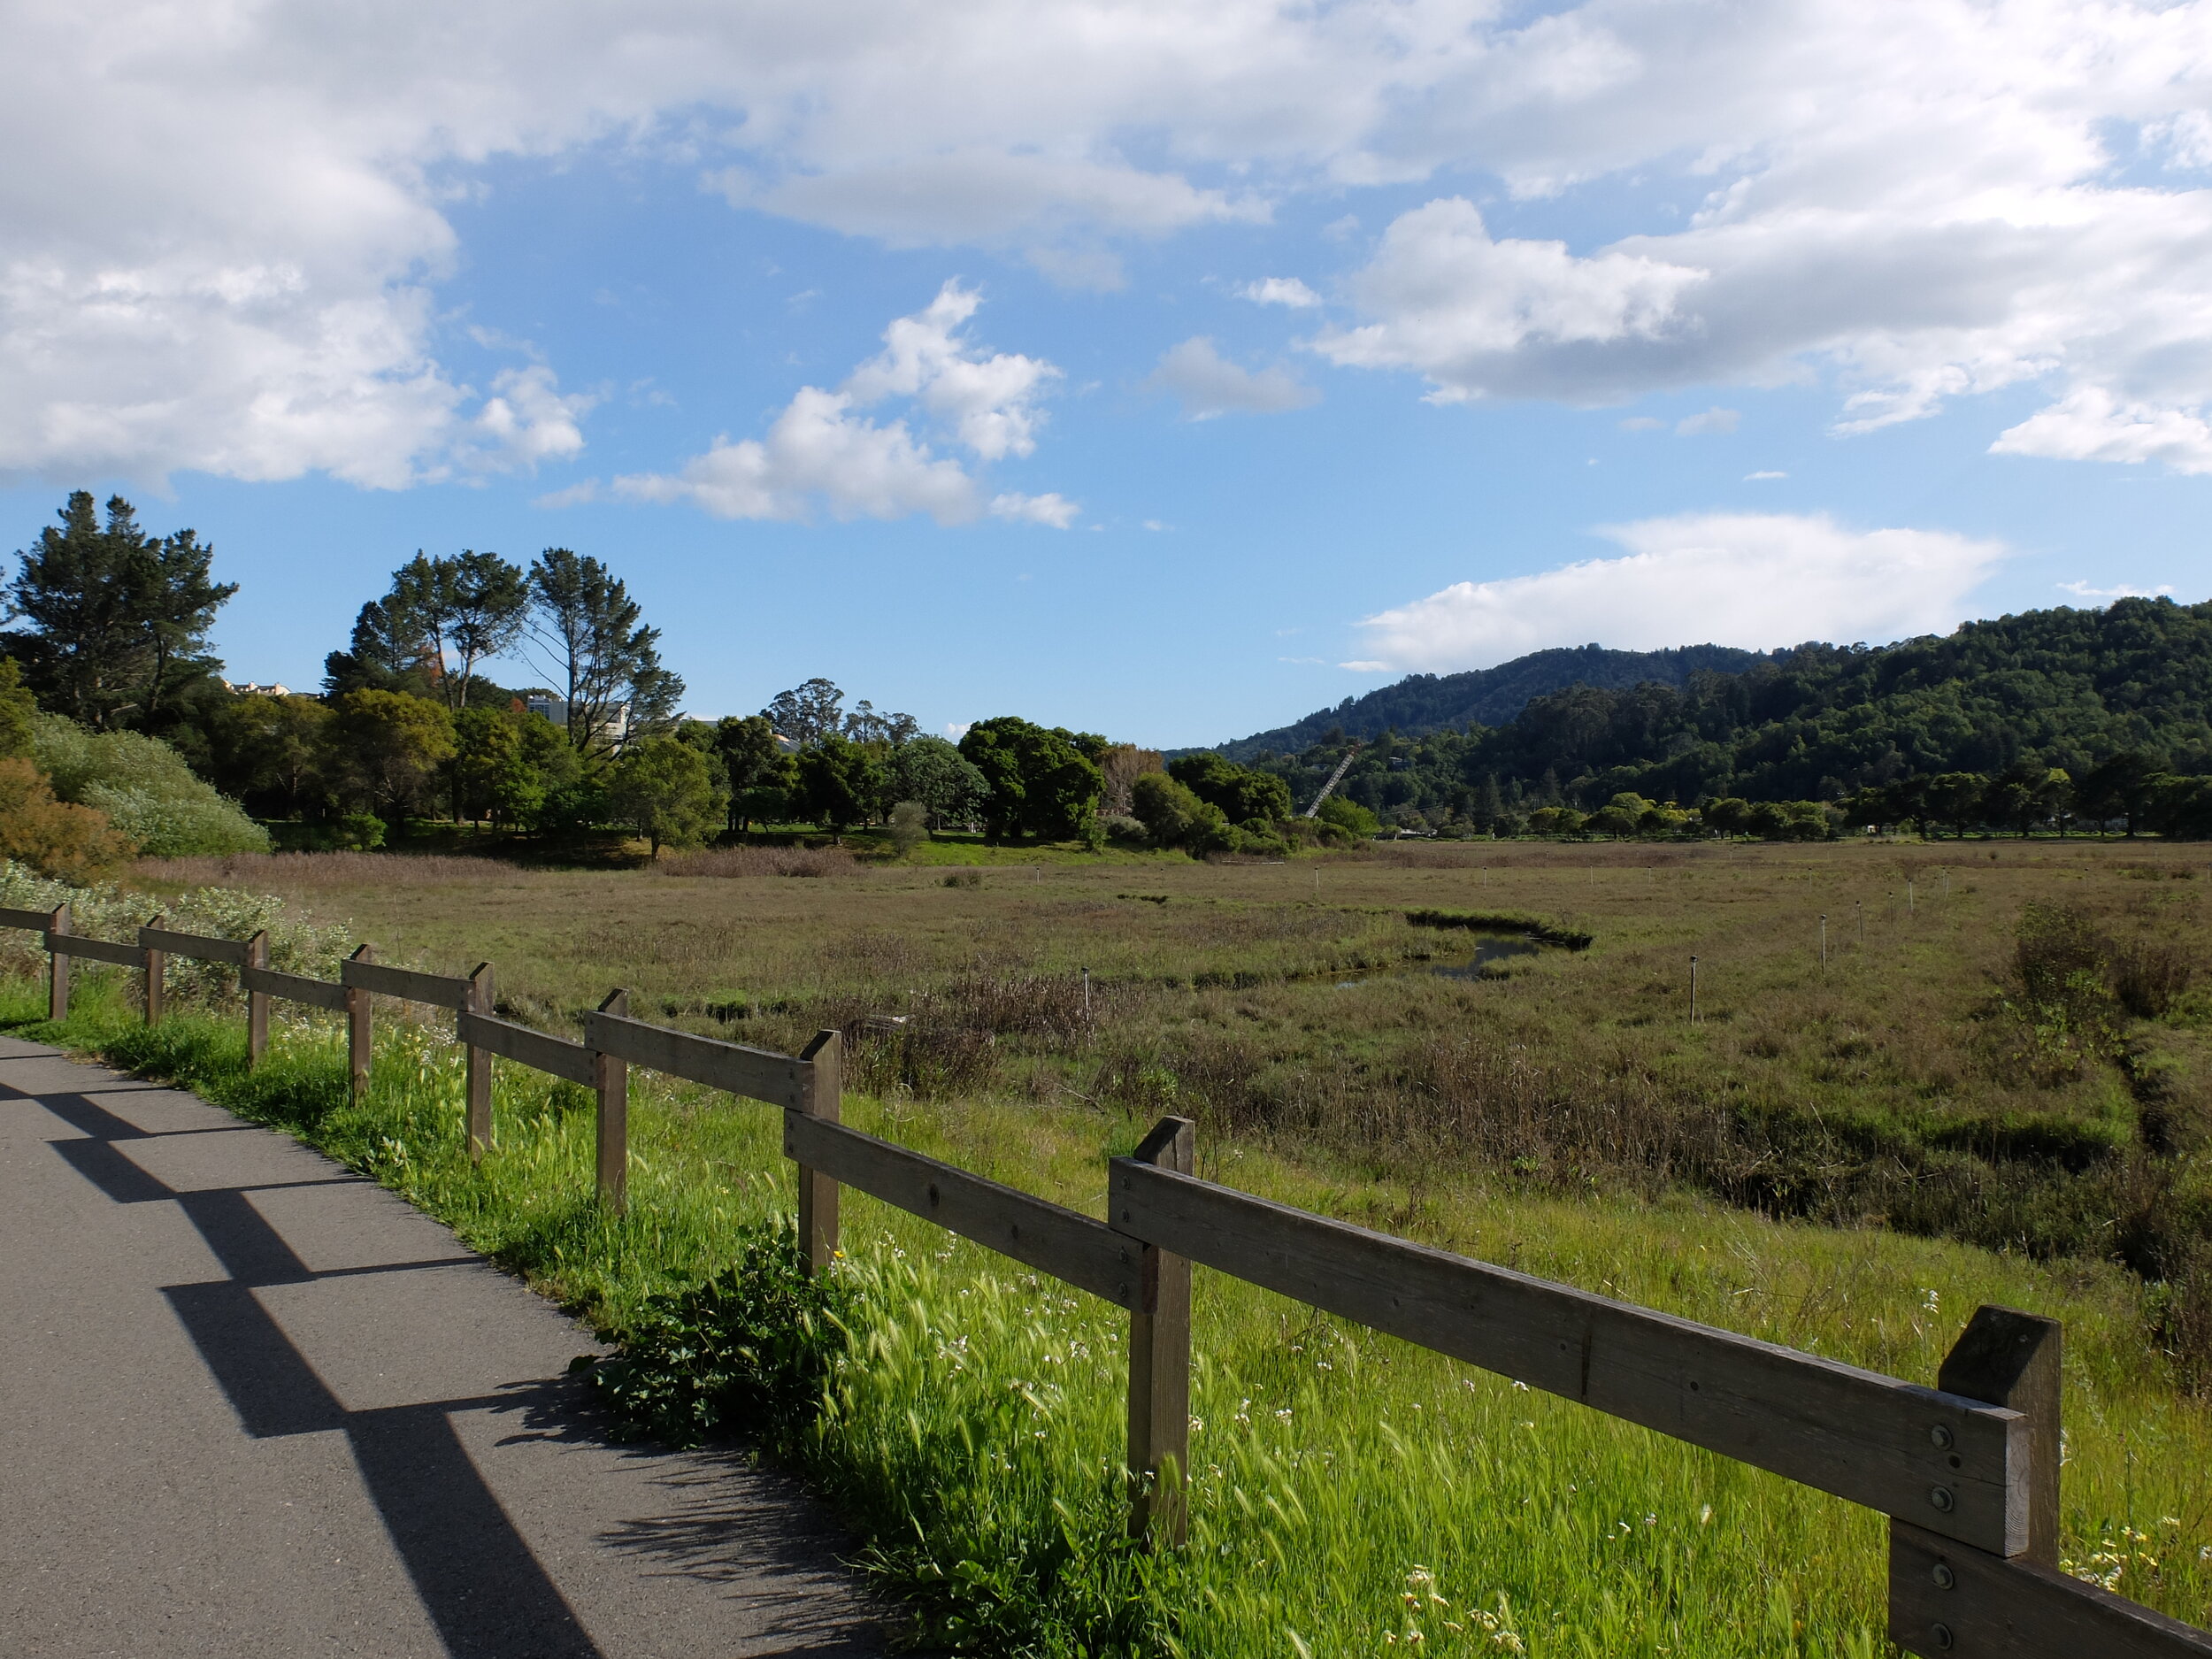 Corte Madera Marsh.  Decades ago there was access to it &amp; I could take the boys bicycling in it.